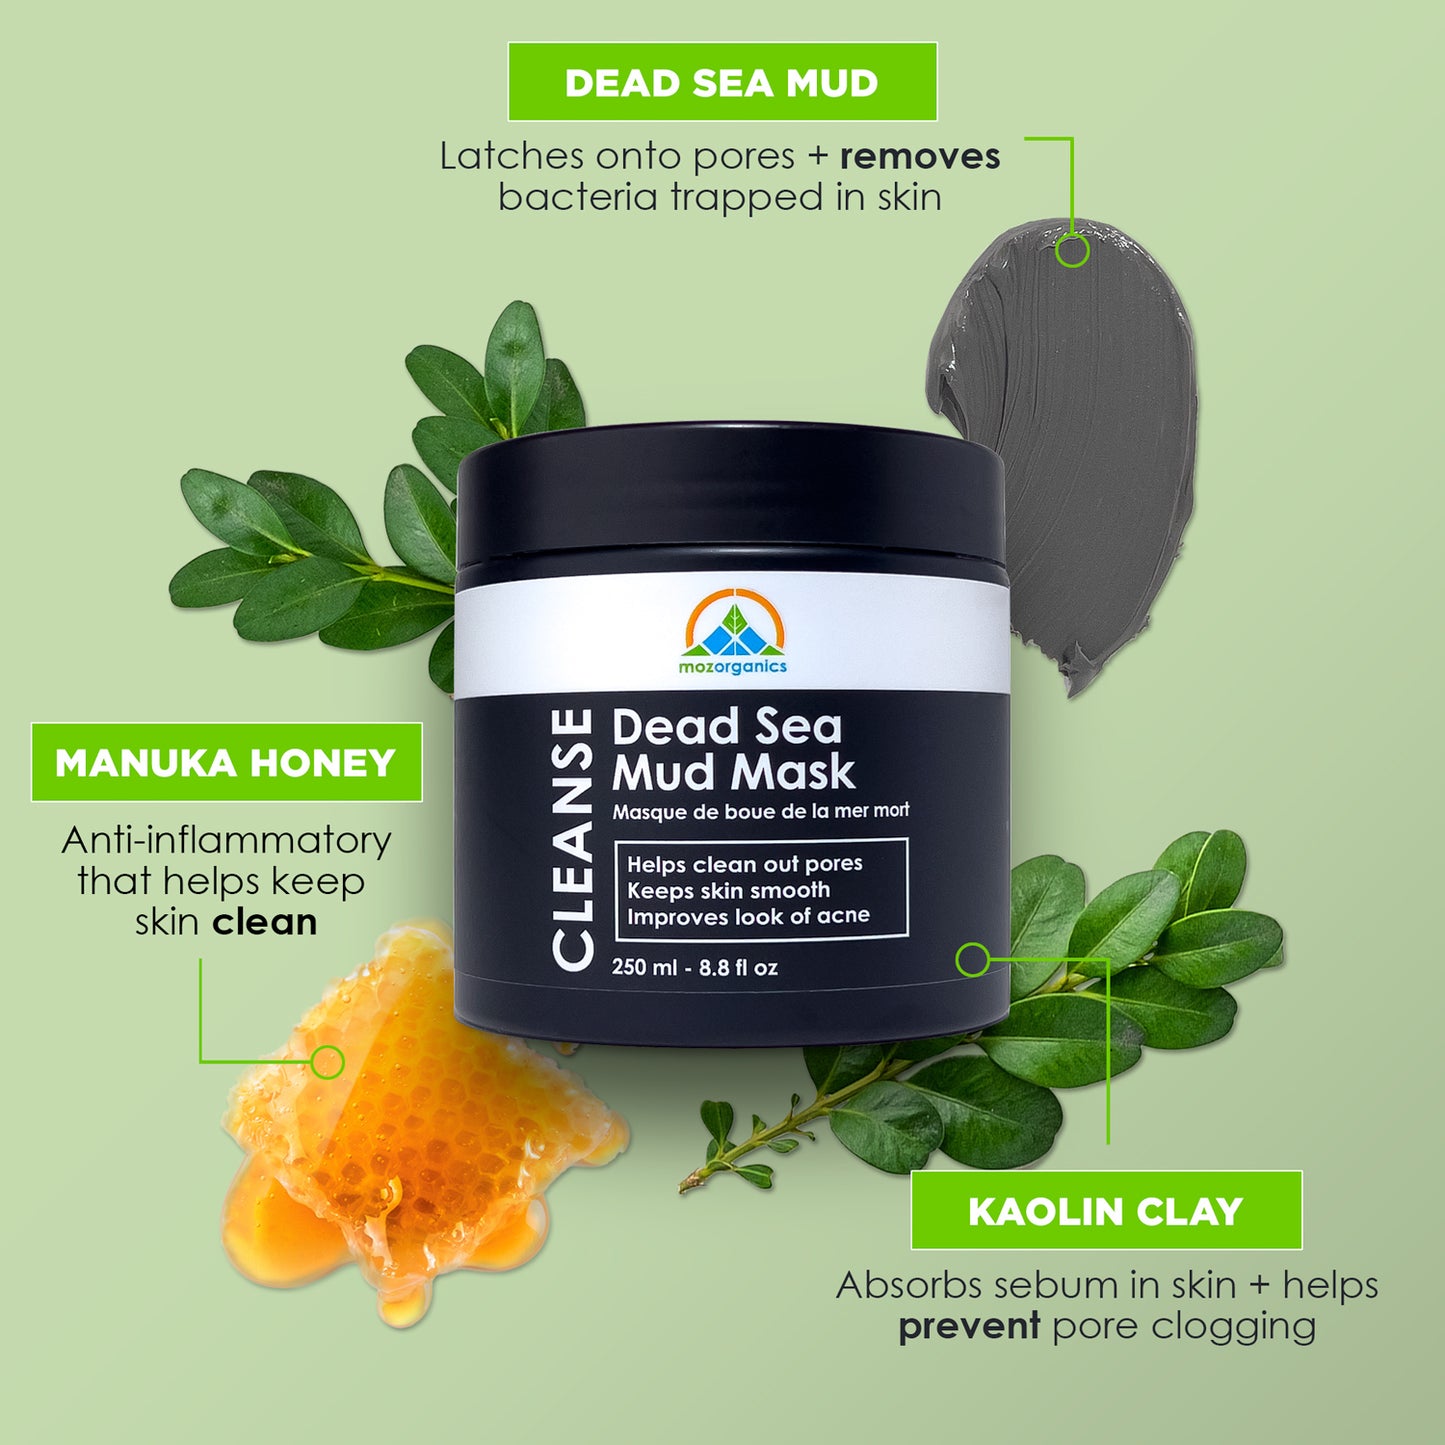 Dead Sea Mud Mask: Clear Acne, Exfoliate Dead Skin, and Reveal Radiance